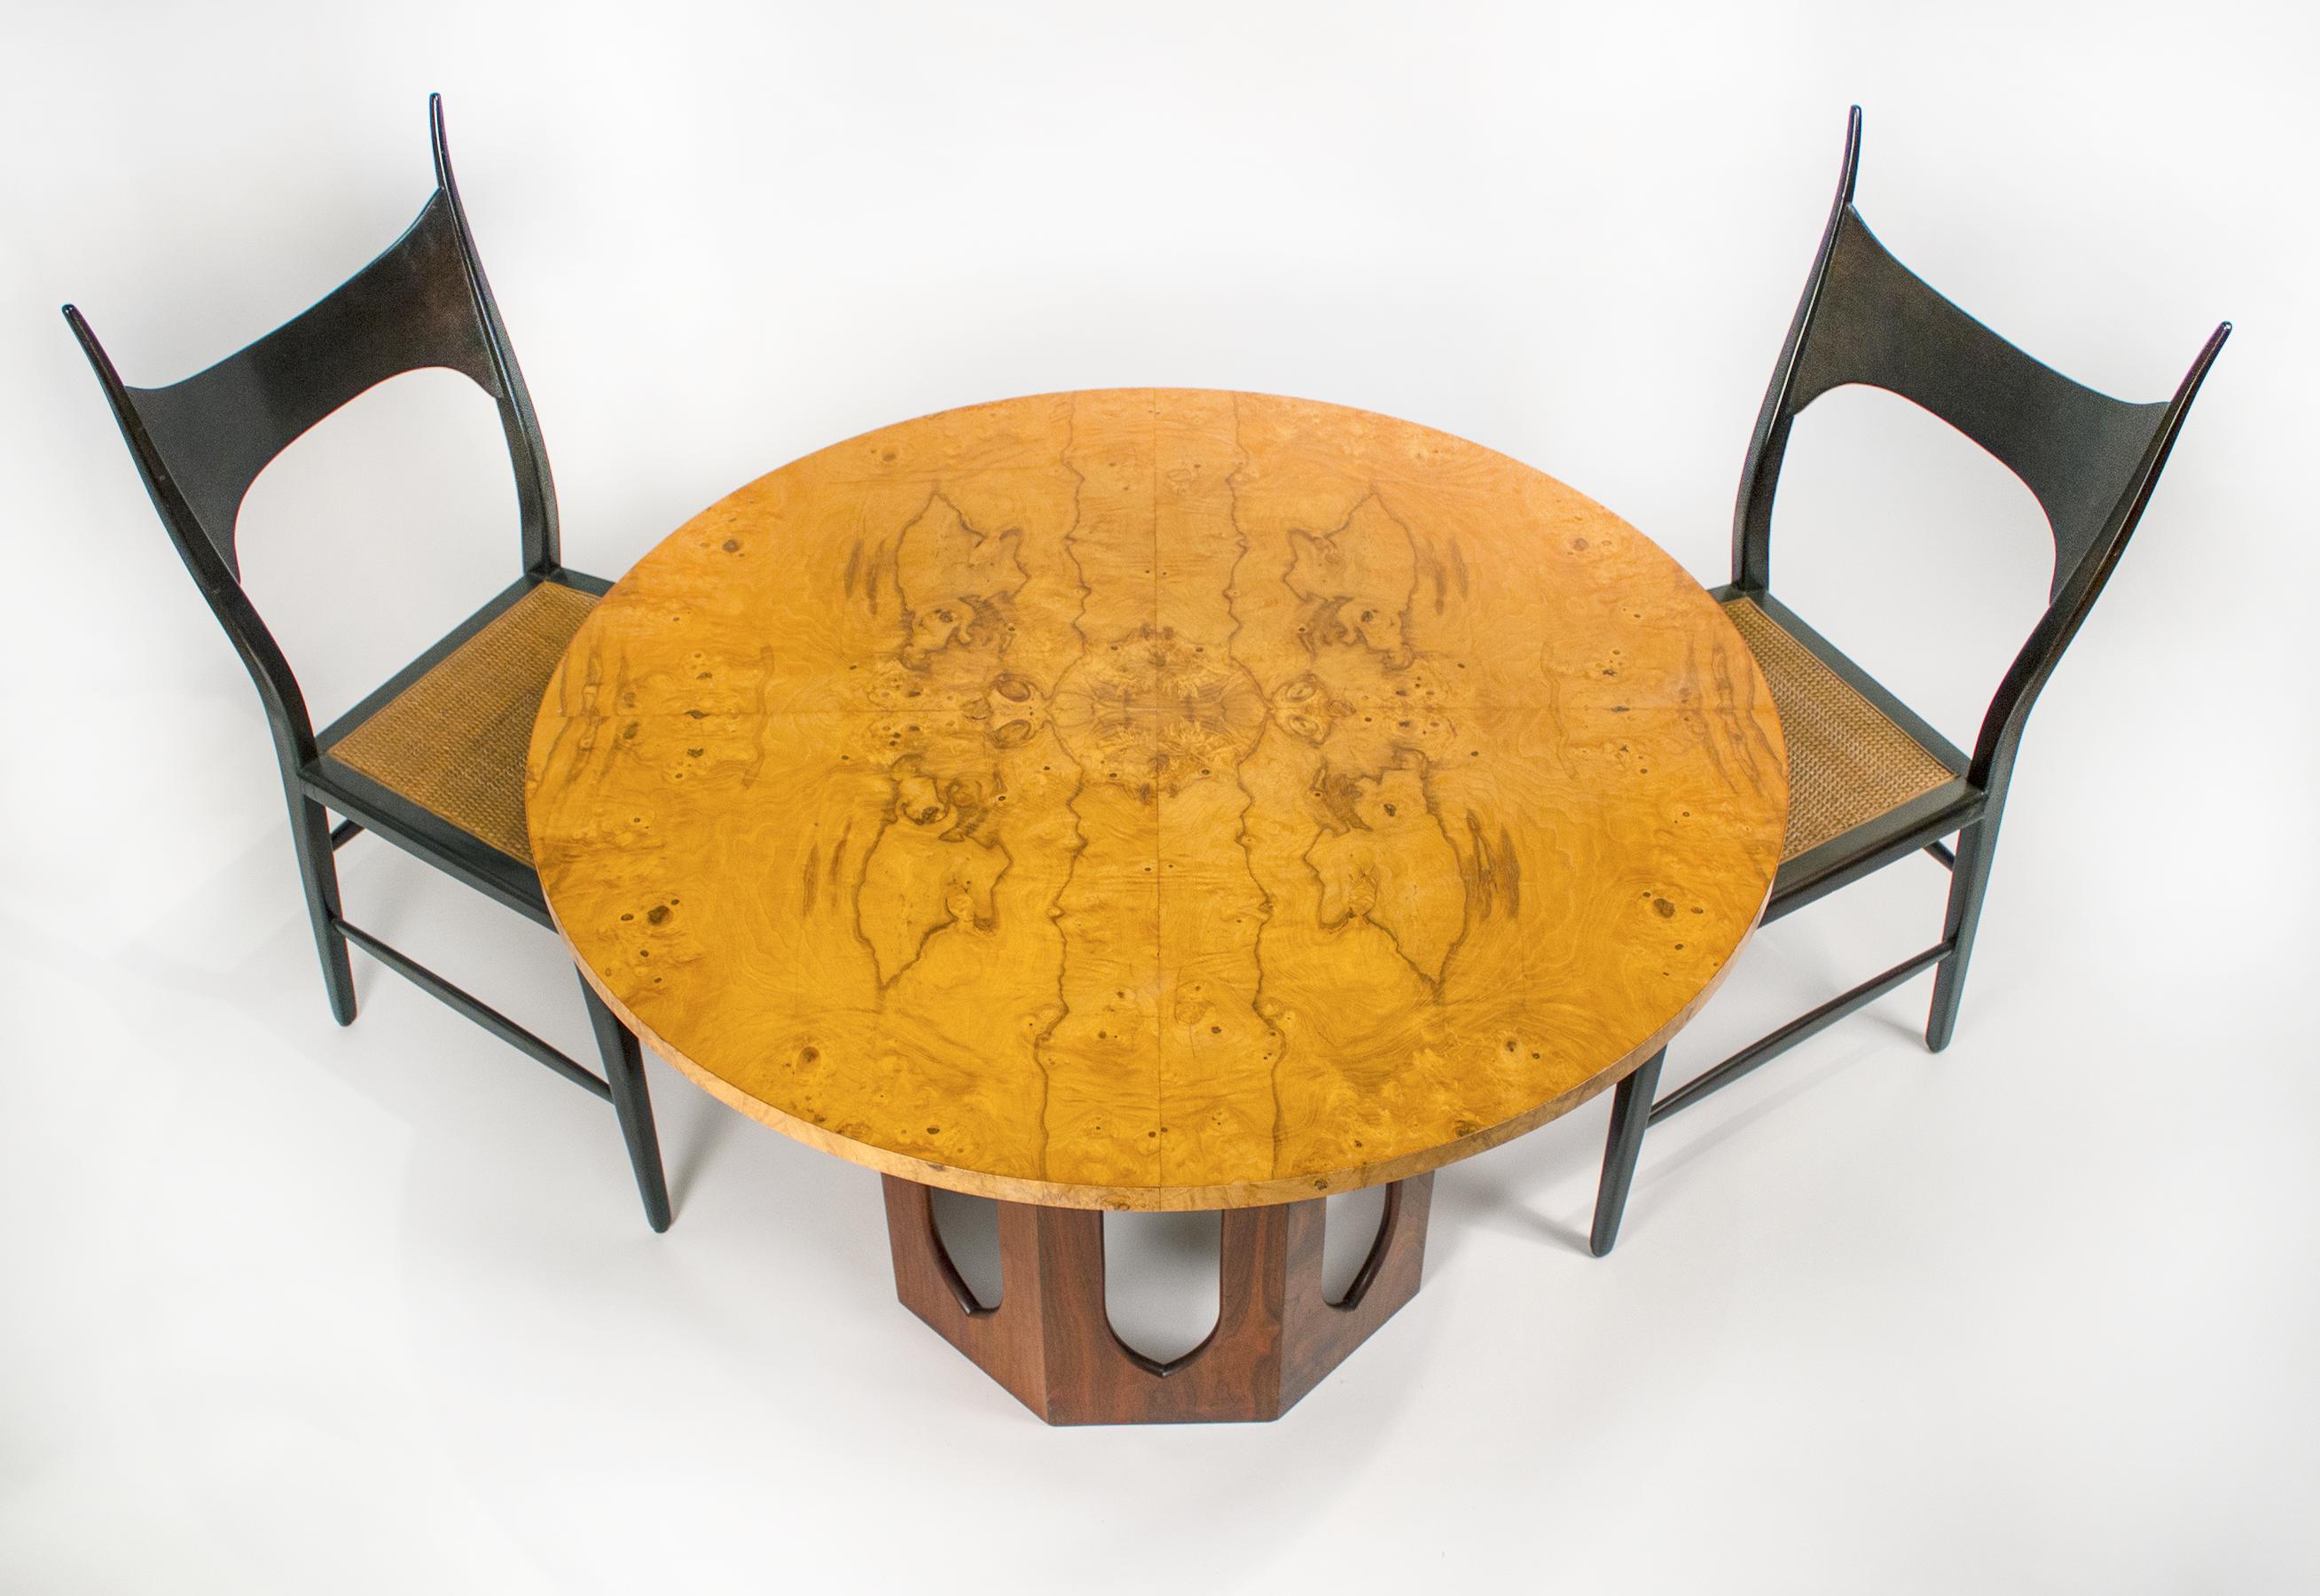 Edward Wormley Game Table for Dunbar, Solid Walnut & Olive Burlwood

Gorgeous Dunbar table with a four-panel bookmatched olive burl wood top and a solid walnut base. Signed with the 'Big D' metal Dunbar manufacturer's label. All original condition,